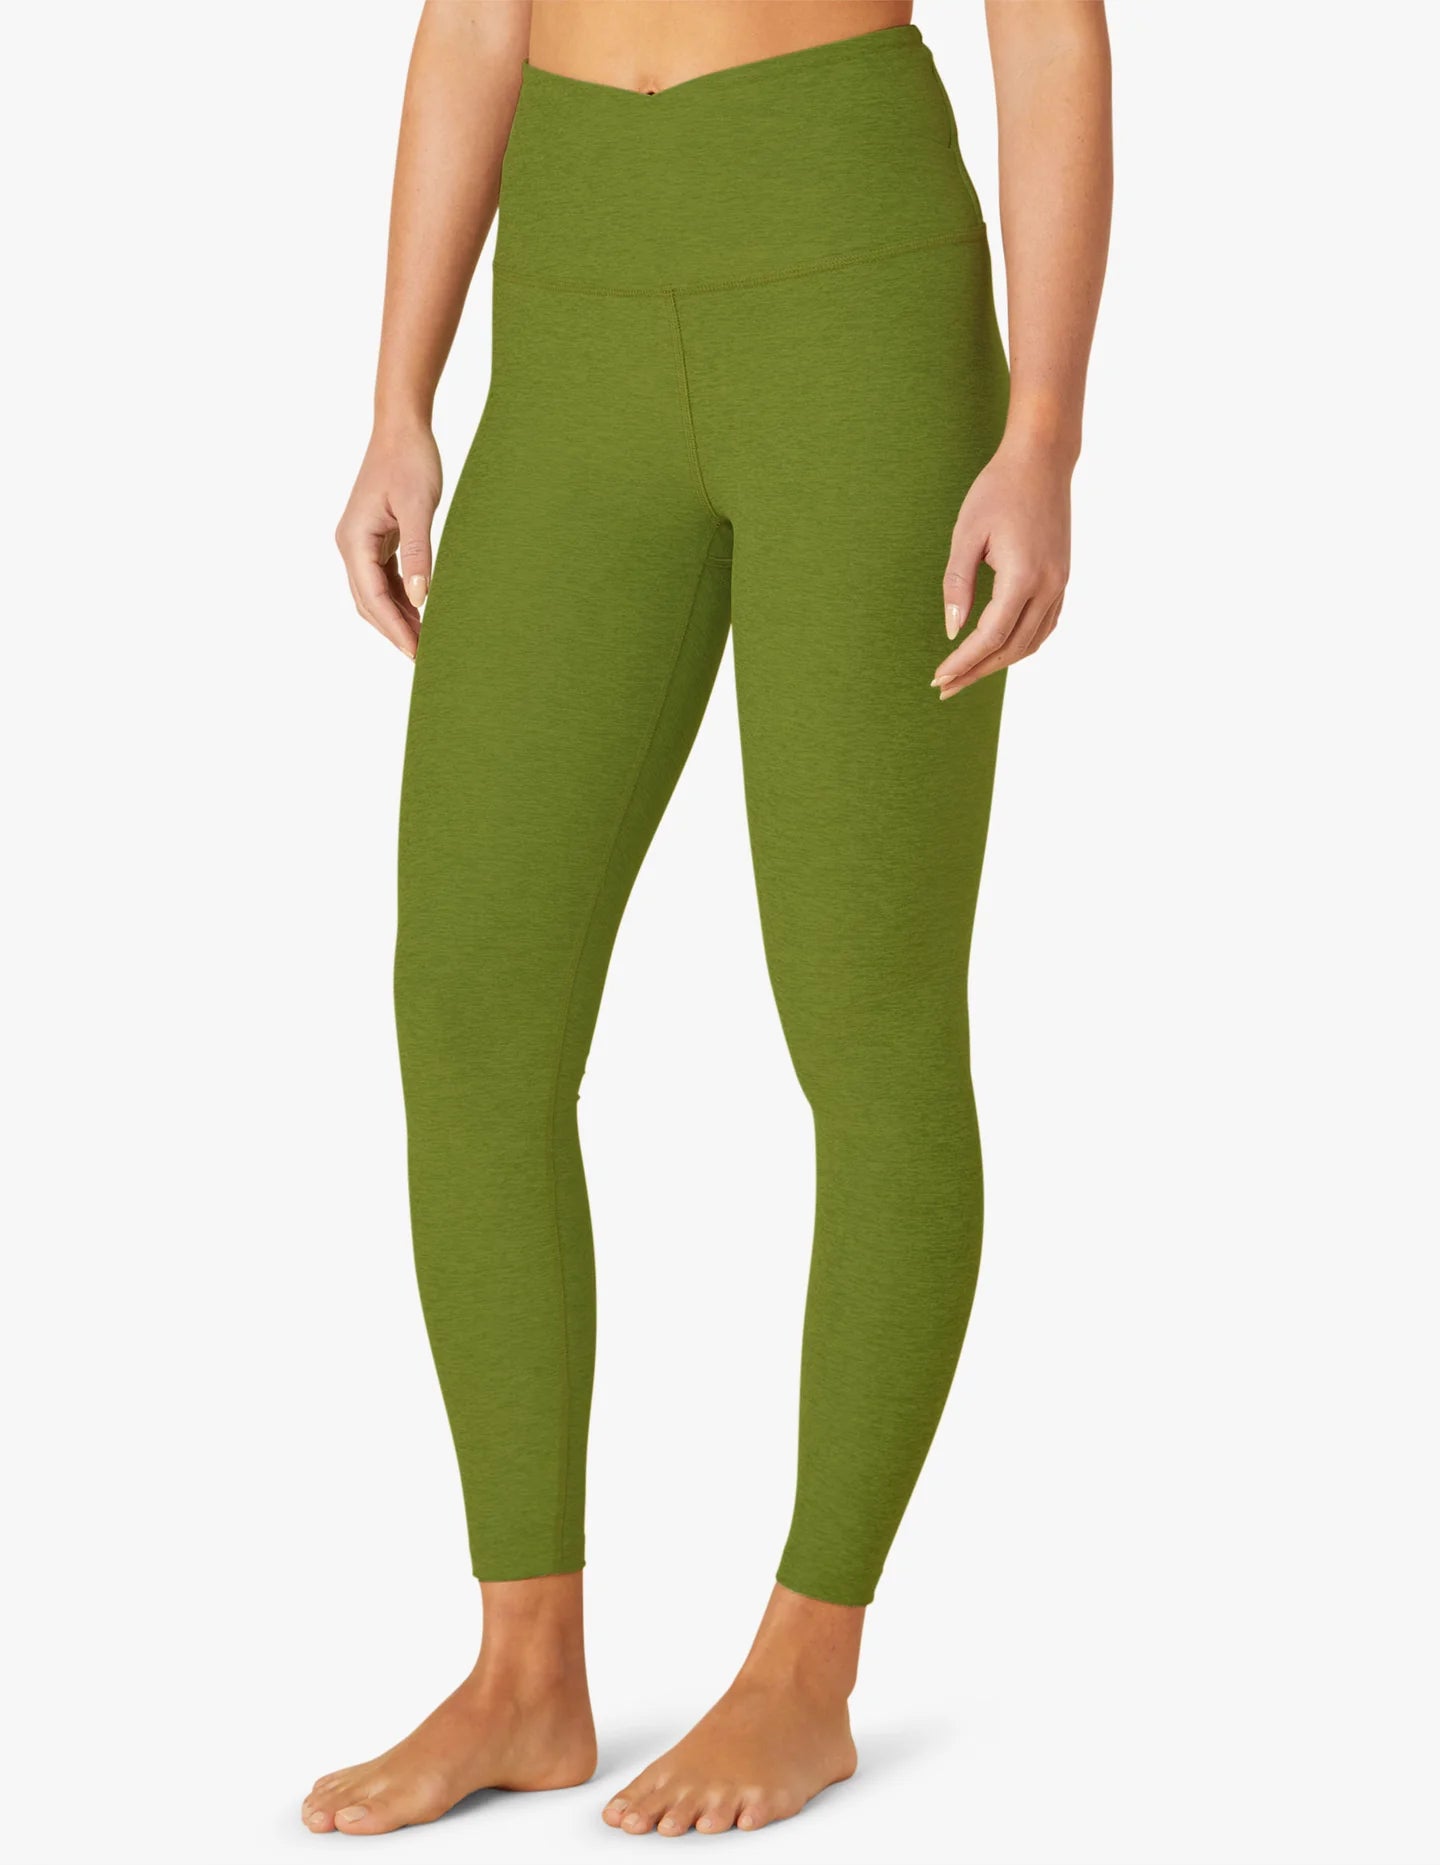 Yoga Clothing Outlet: Sale, Discount & Clearance from 50+ Yoga Brands